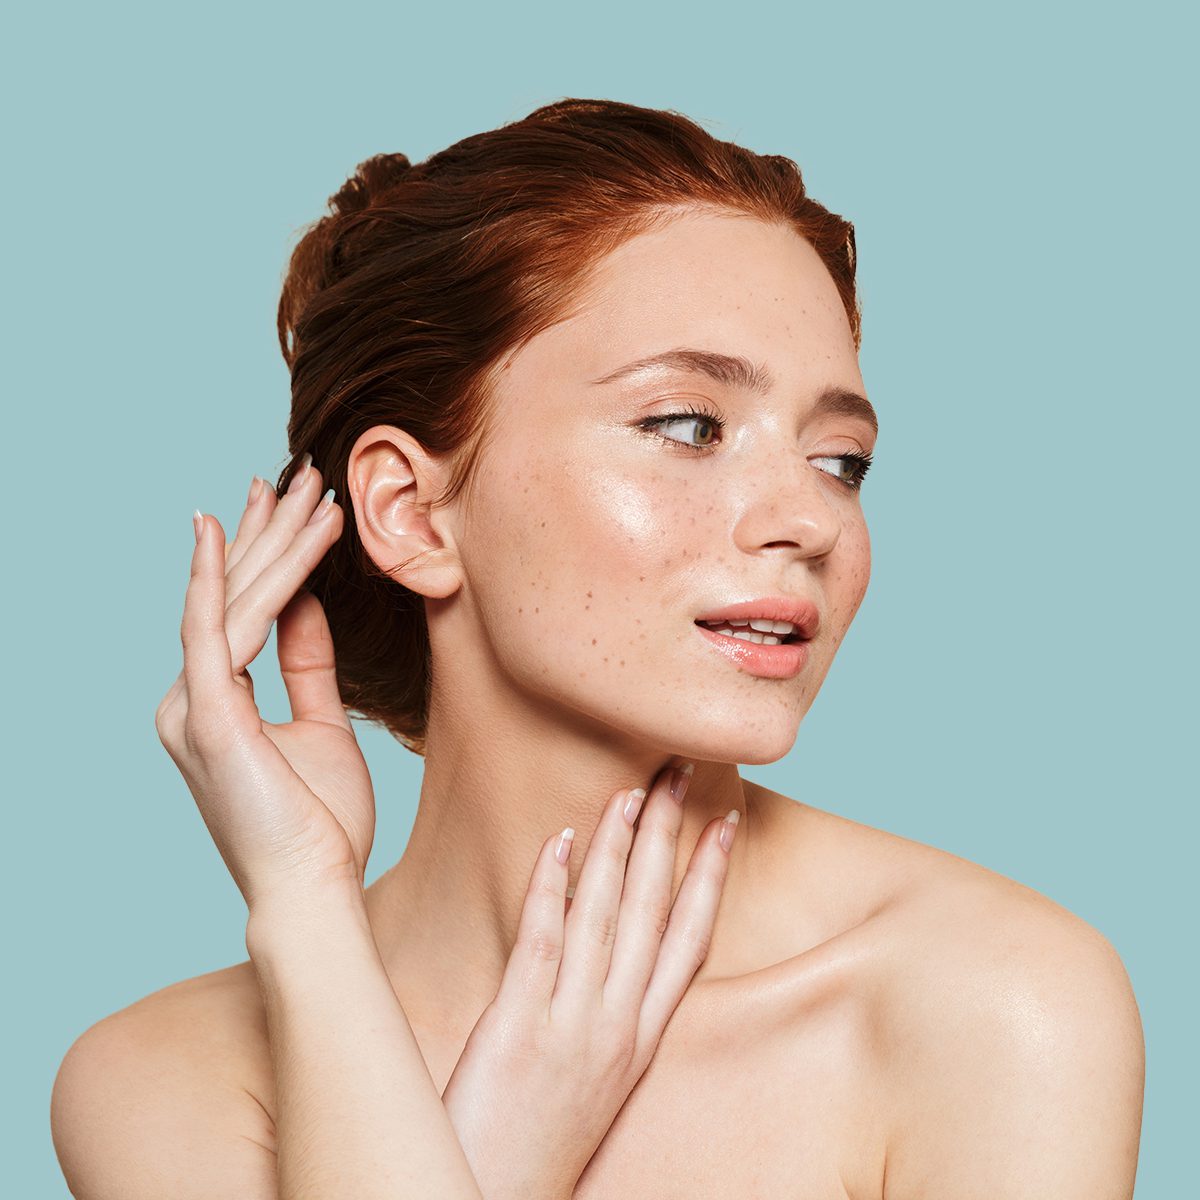 A young woman with fair skin and red hair poses gracefully with her hands touching her face and neck against a light blue background.